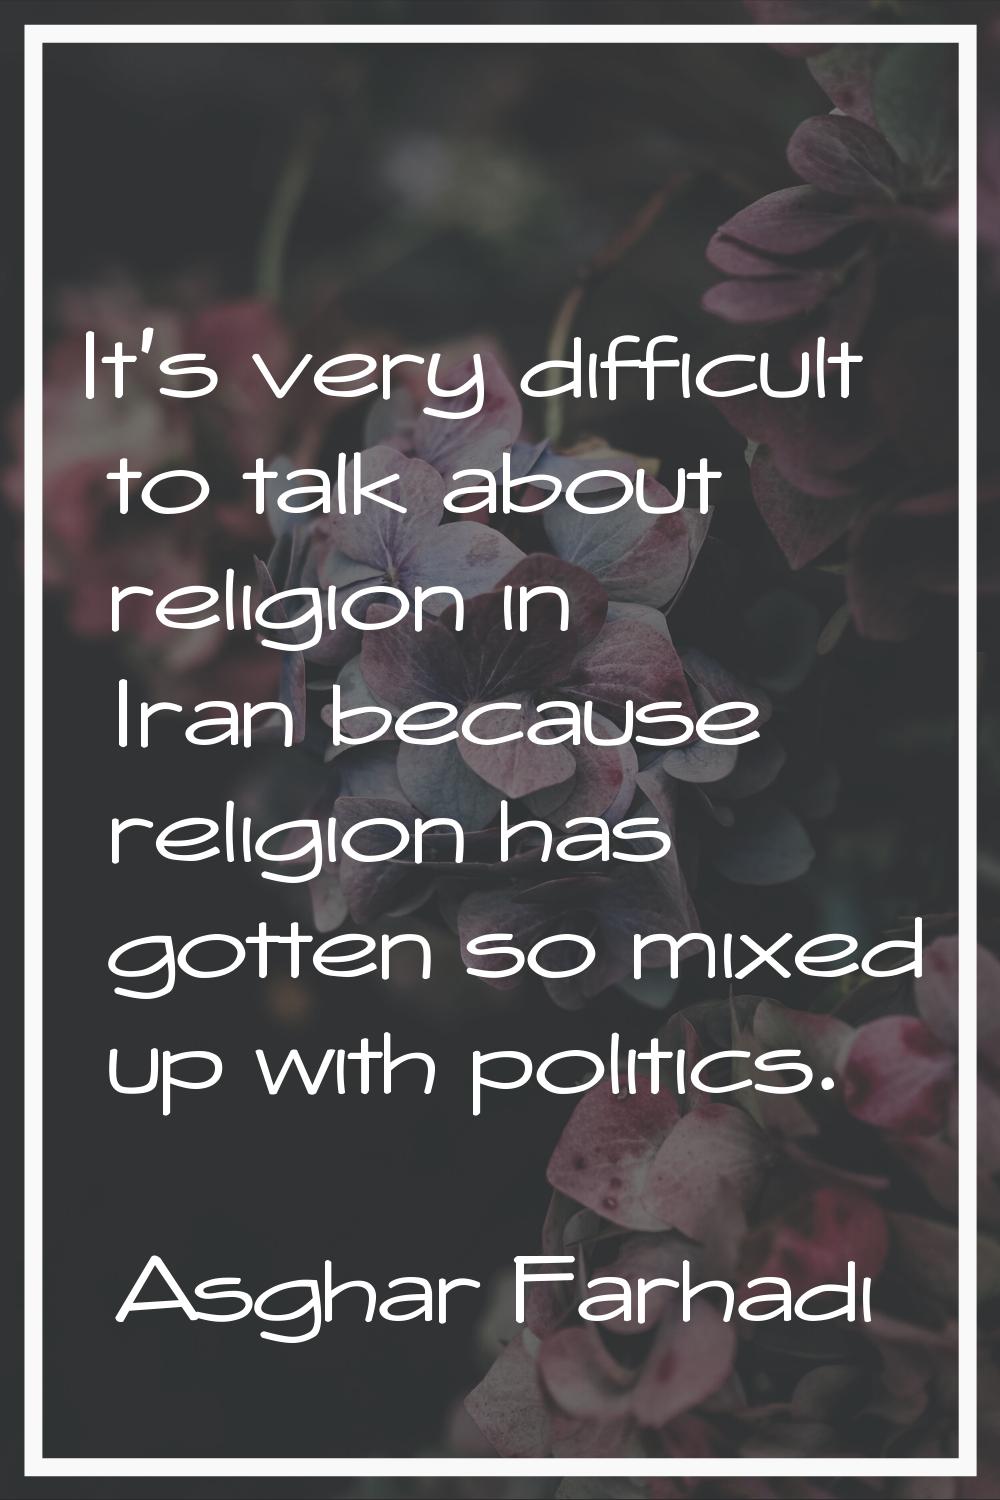 It's very difficult to talk about religion in Iran because religion has gotten so mixed up with pol